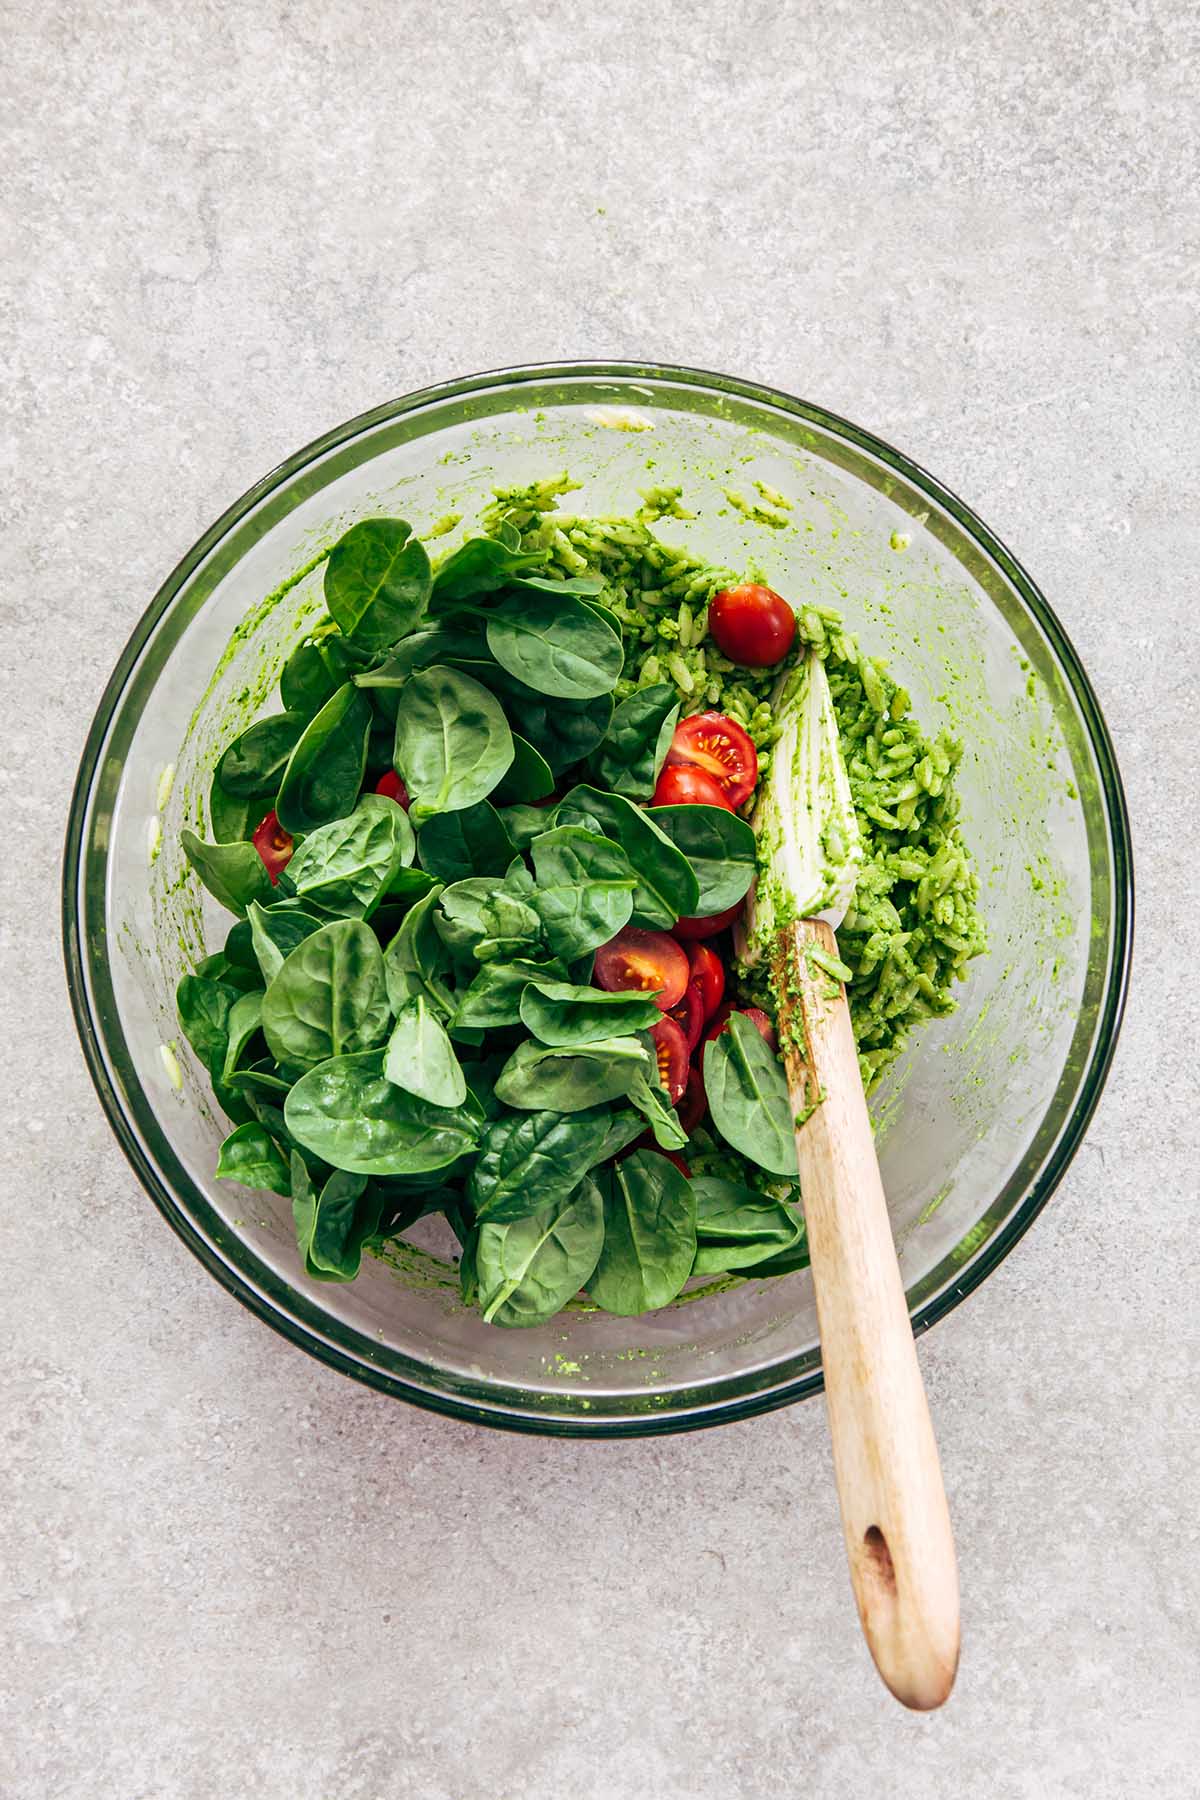 A glass bowl of pesto orzo, halved cherry tomatoes, baby spinach leaves, and torn basil.